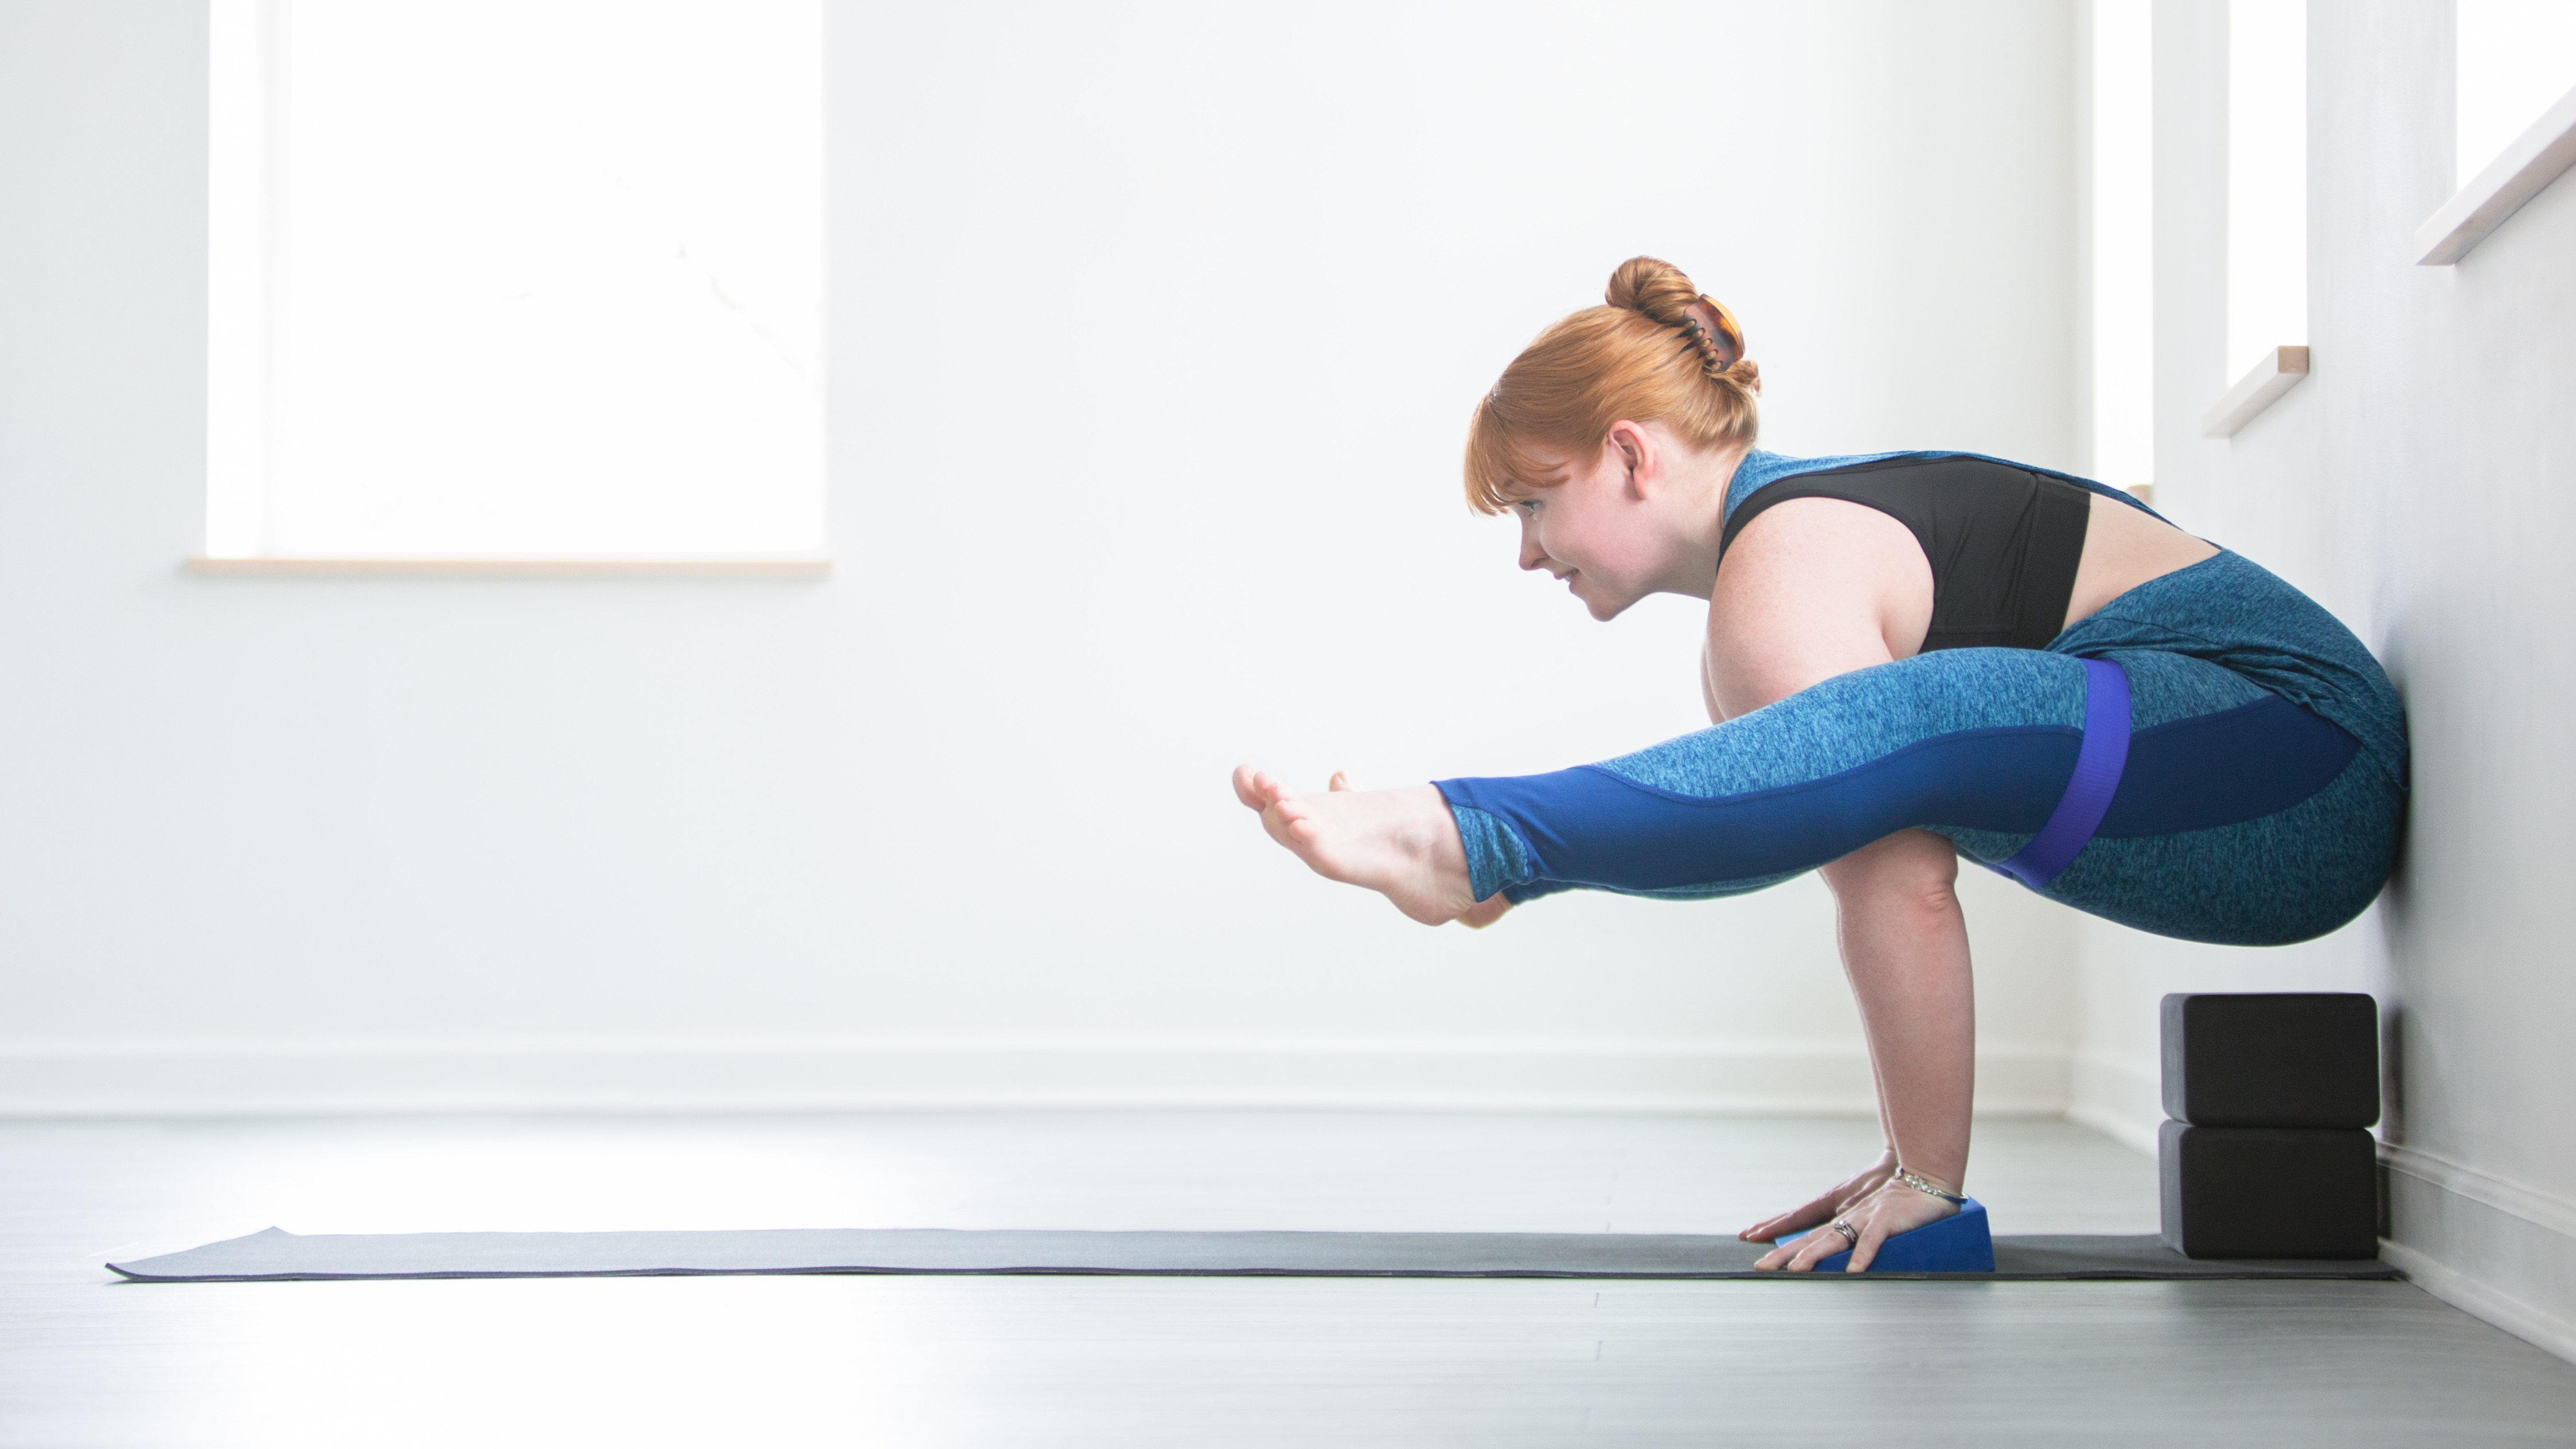 Camel Pose, Deconstructed: 9 Exercises to Break Down This Posture